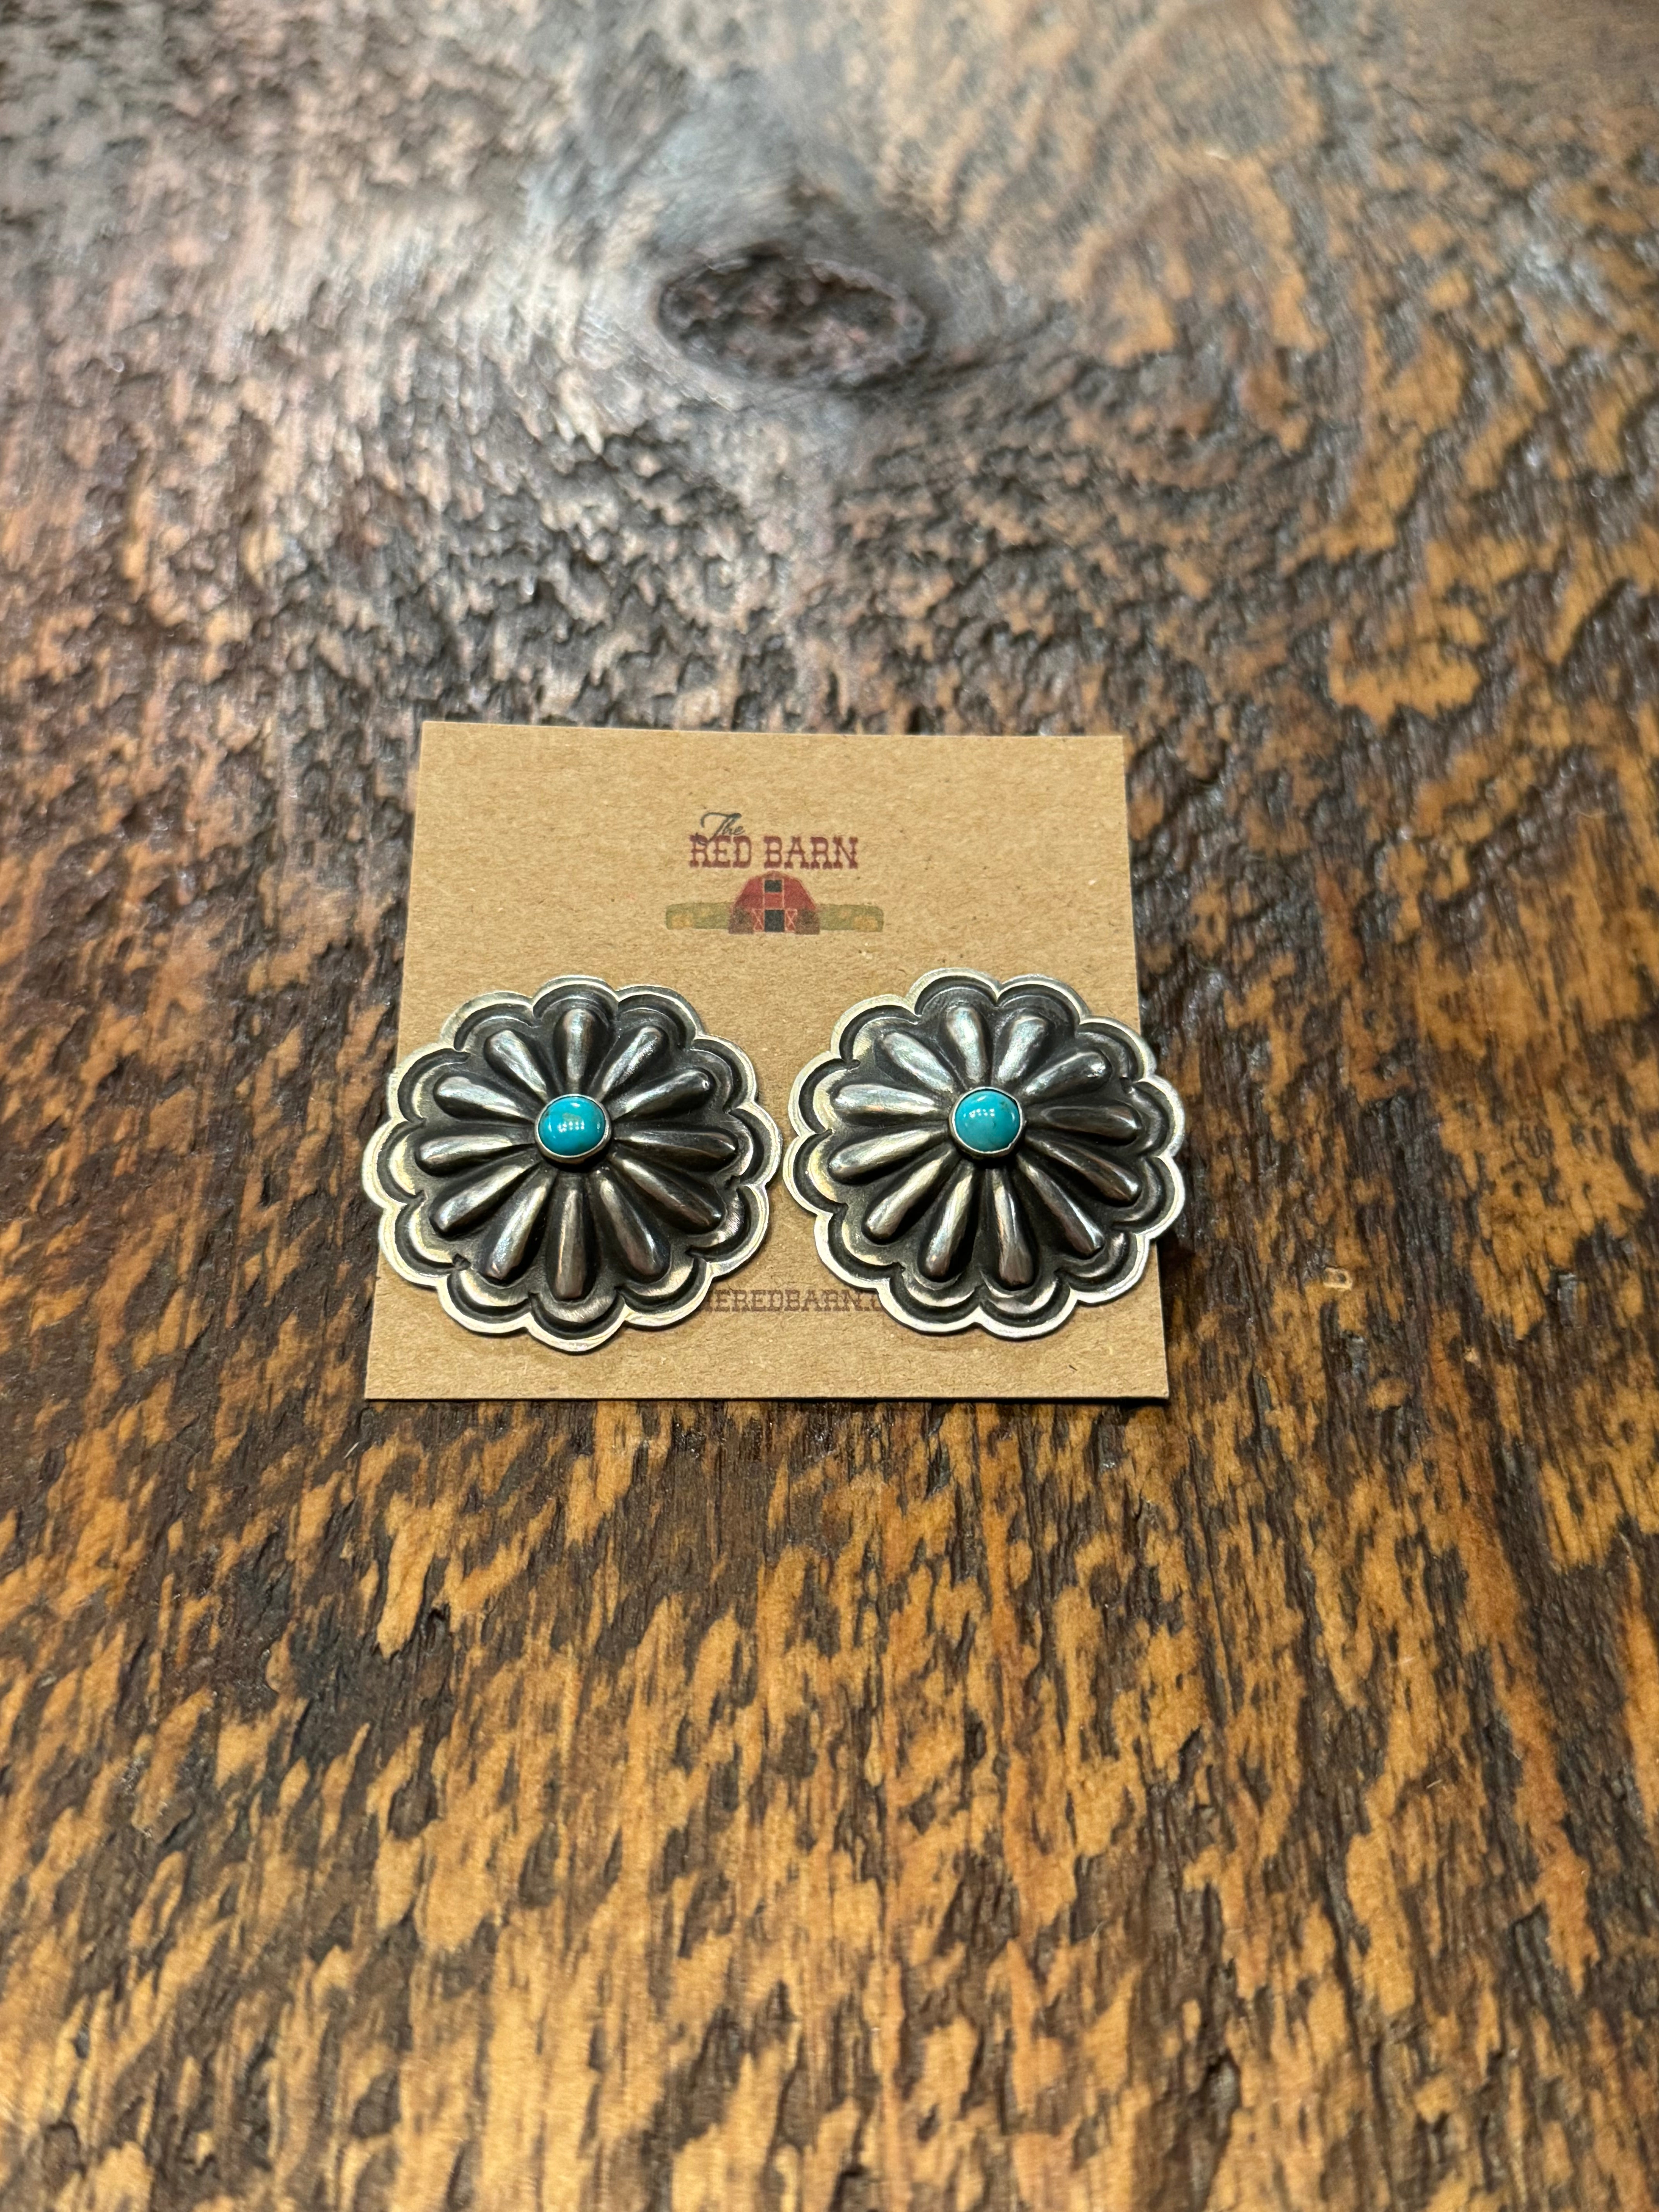 Sterling Silver & Turquoise Round Concho Earrings